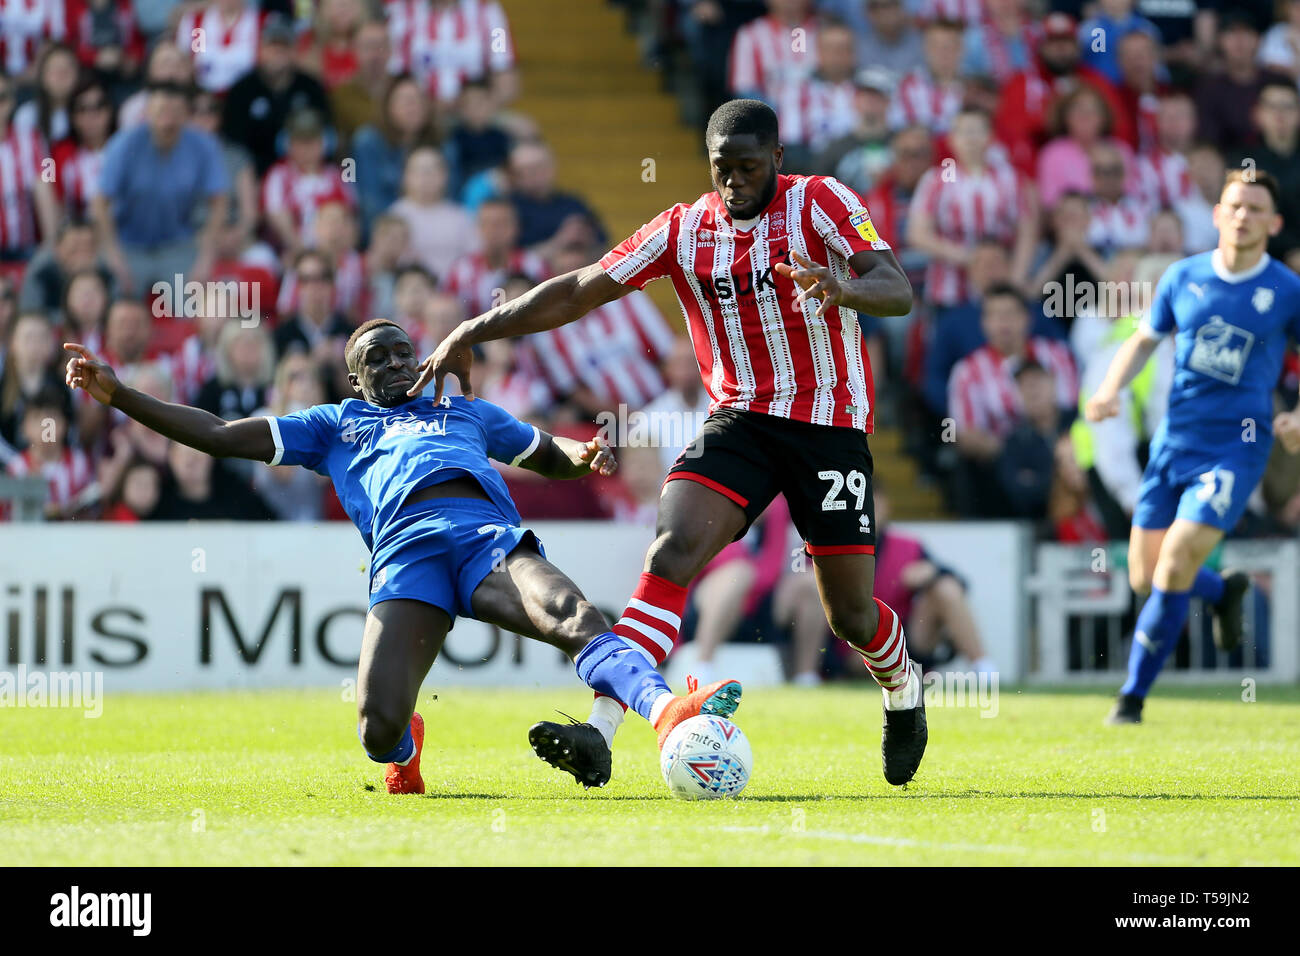 Tranmere Rovers Zoumana Bakayogo tackles Lincoln City's John Akinde during the Sky Bet League Two match at Sincil Bank, Lincoln. Stock Photo